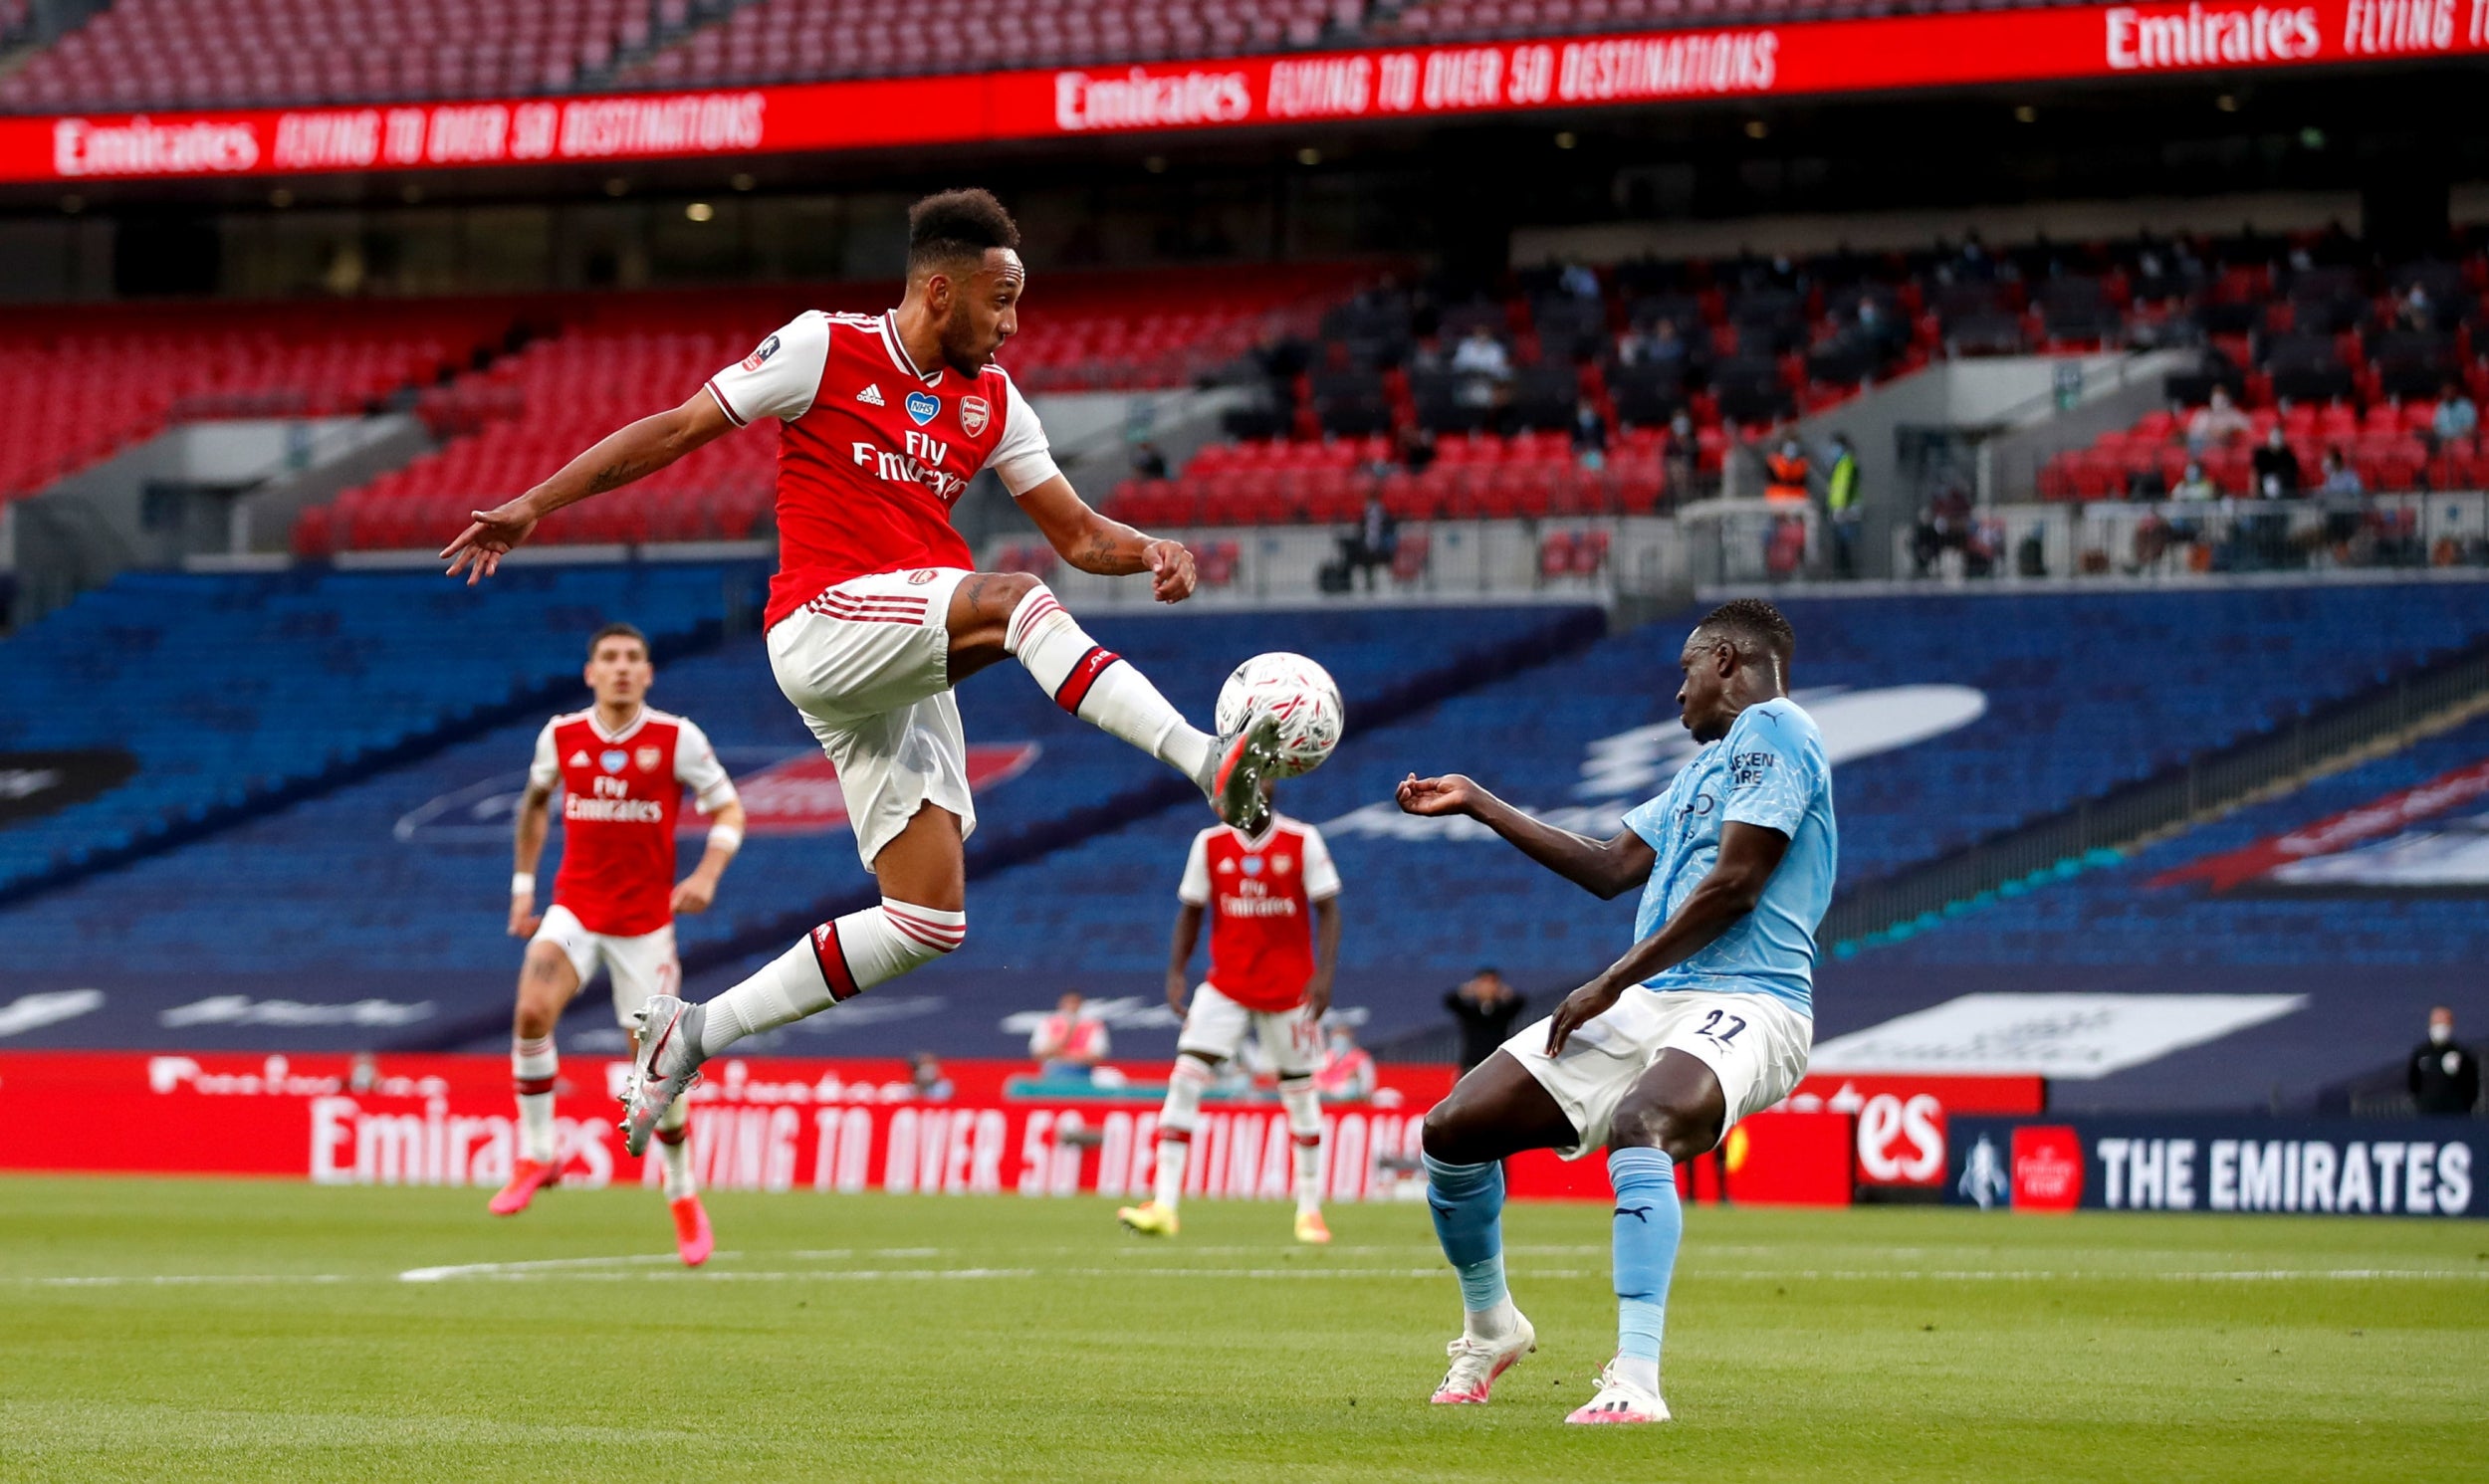 Arsenal 2-0 Manchester City: FA Cup – 18/07/2020